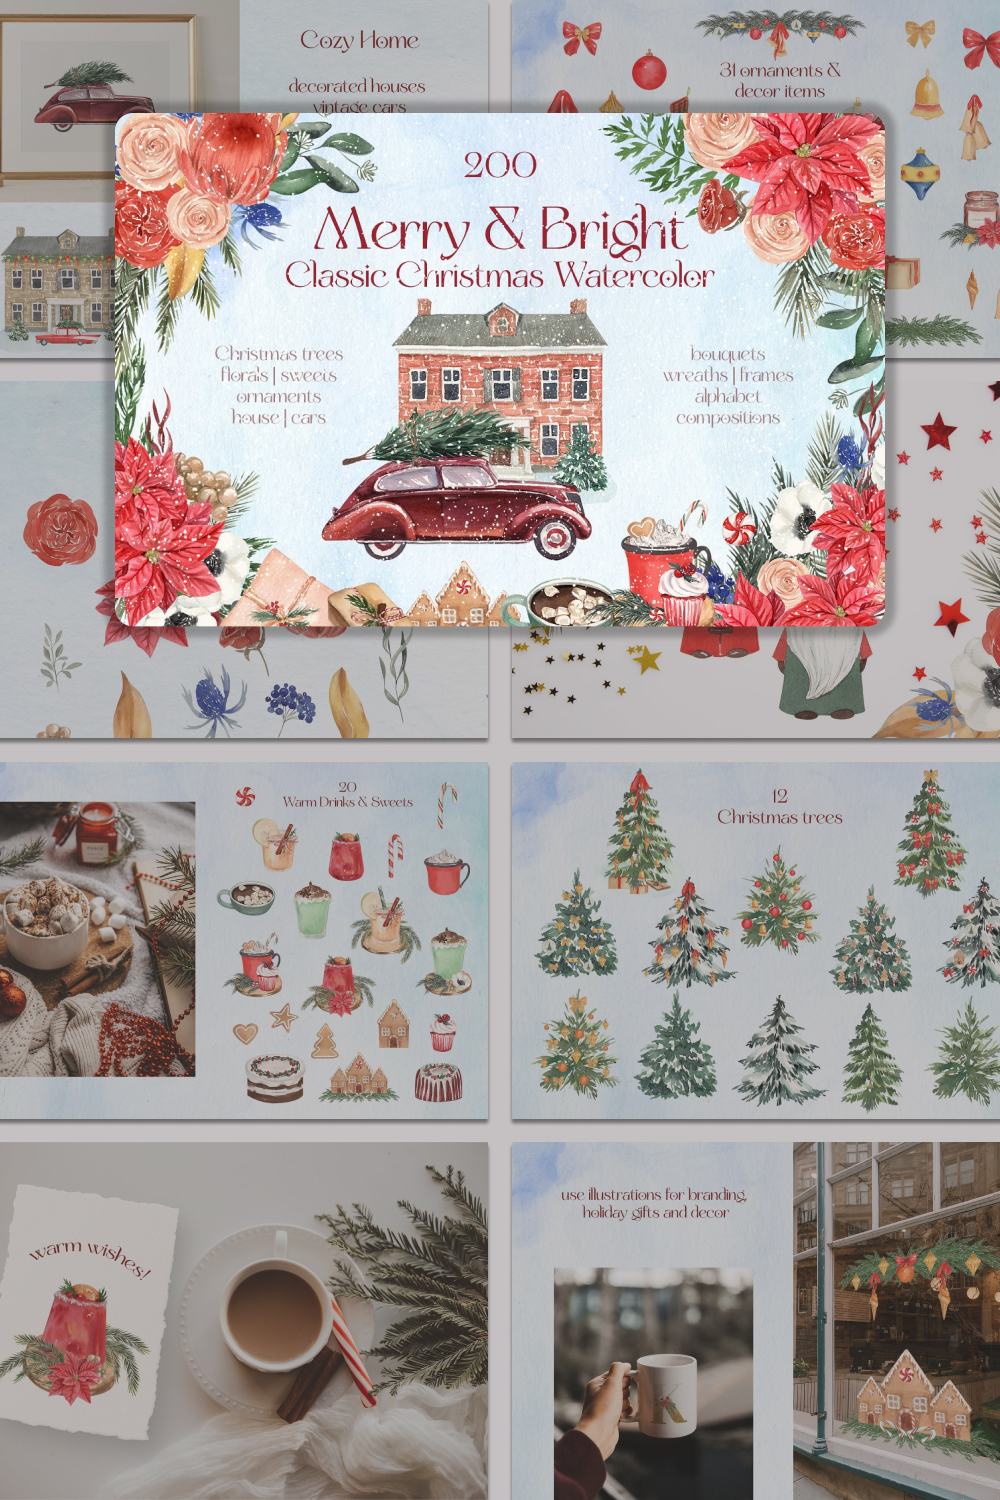 Collage of painted images of Christmas trees, flowers, Christmas decorations.